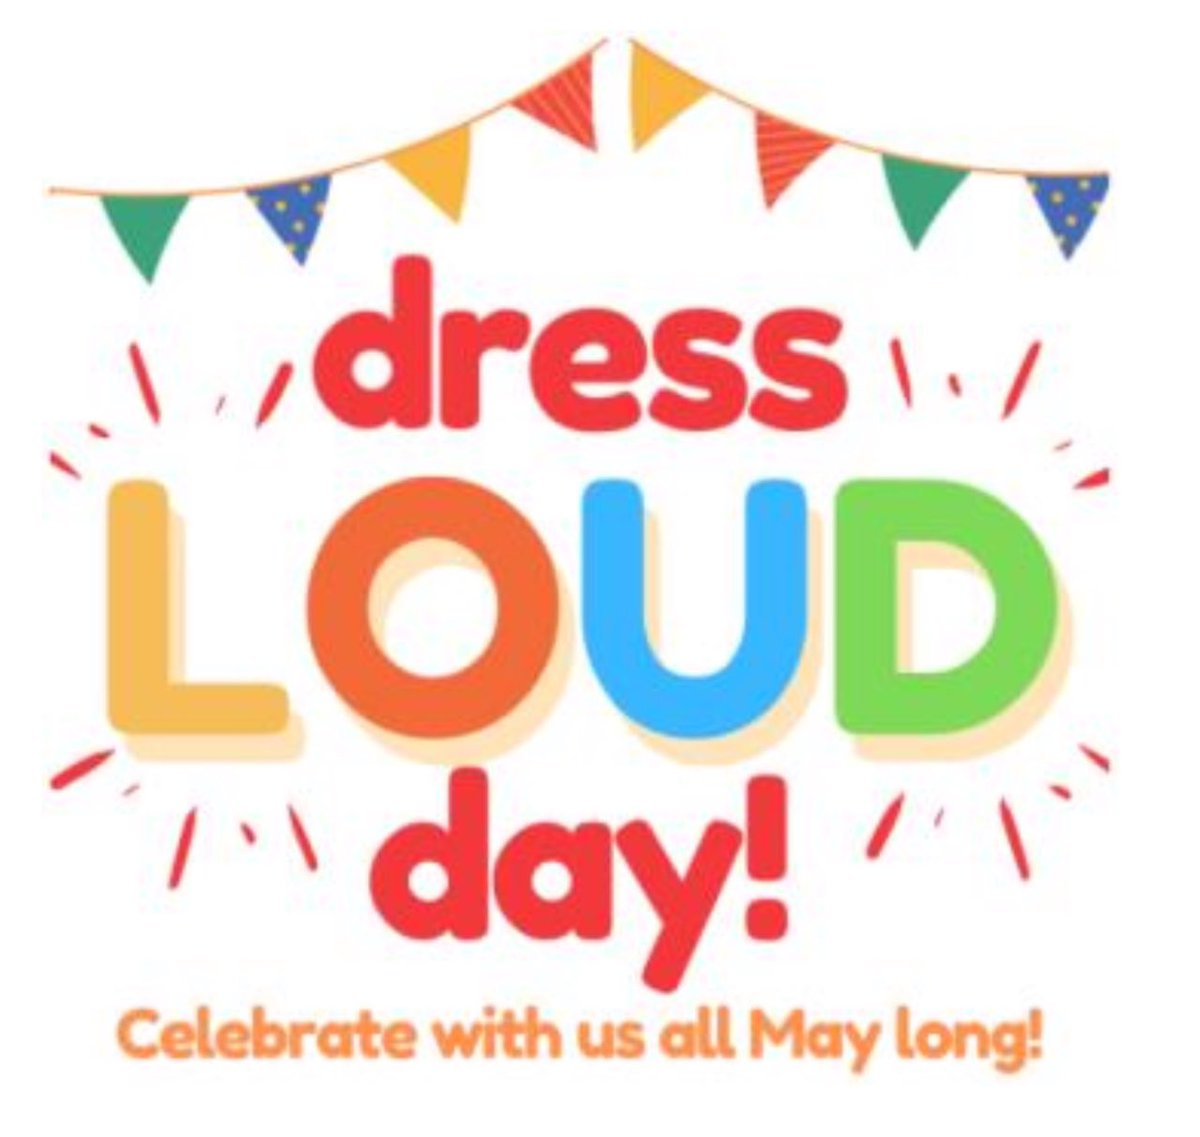 Dress Loud Day – Month of May
May is Speech & Language Awareness Month and we will be celebrating Dress Loud Day @HCDSB on May 13th. #DressLoud @VOICE4DeafKids 

voicefordeafkids.com/DressLoudDay